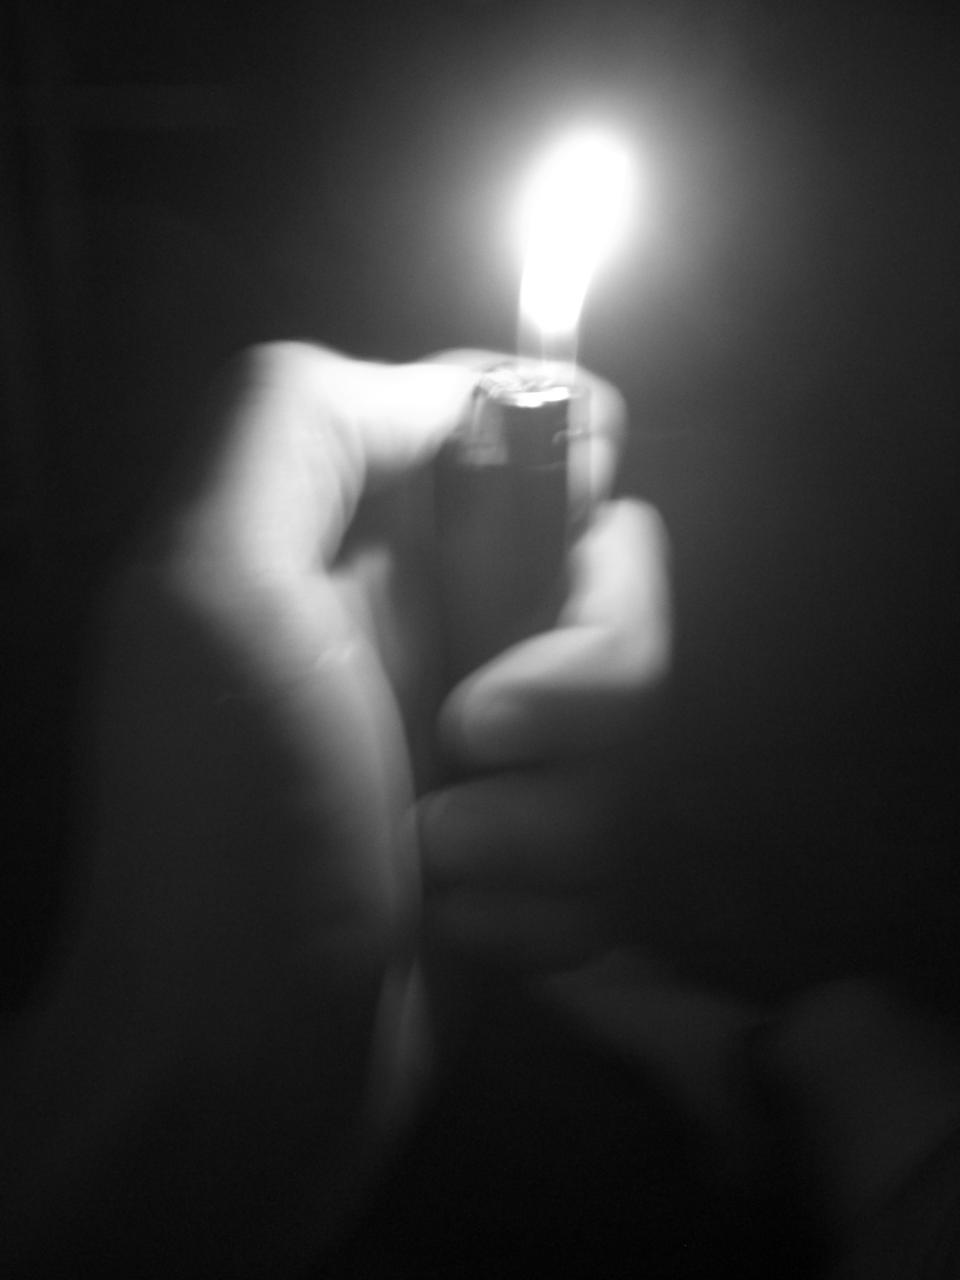 A photo of a lighter being lit.